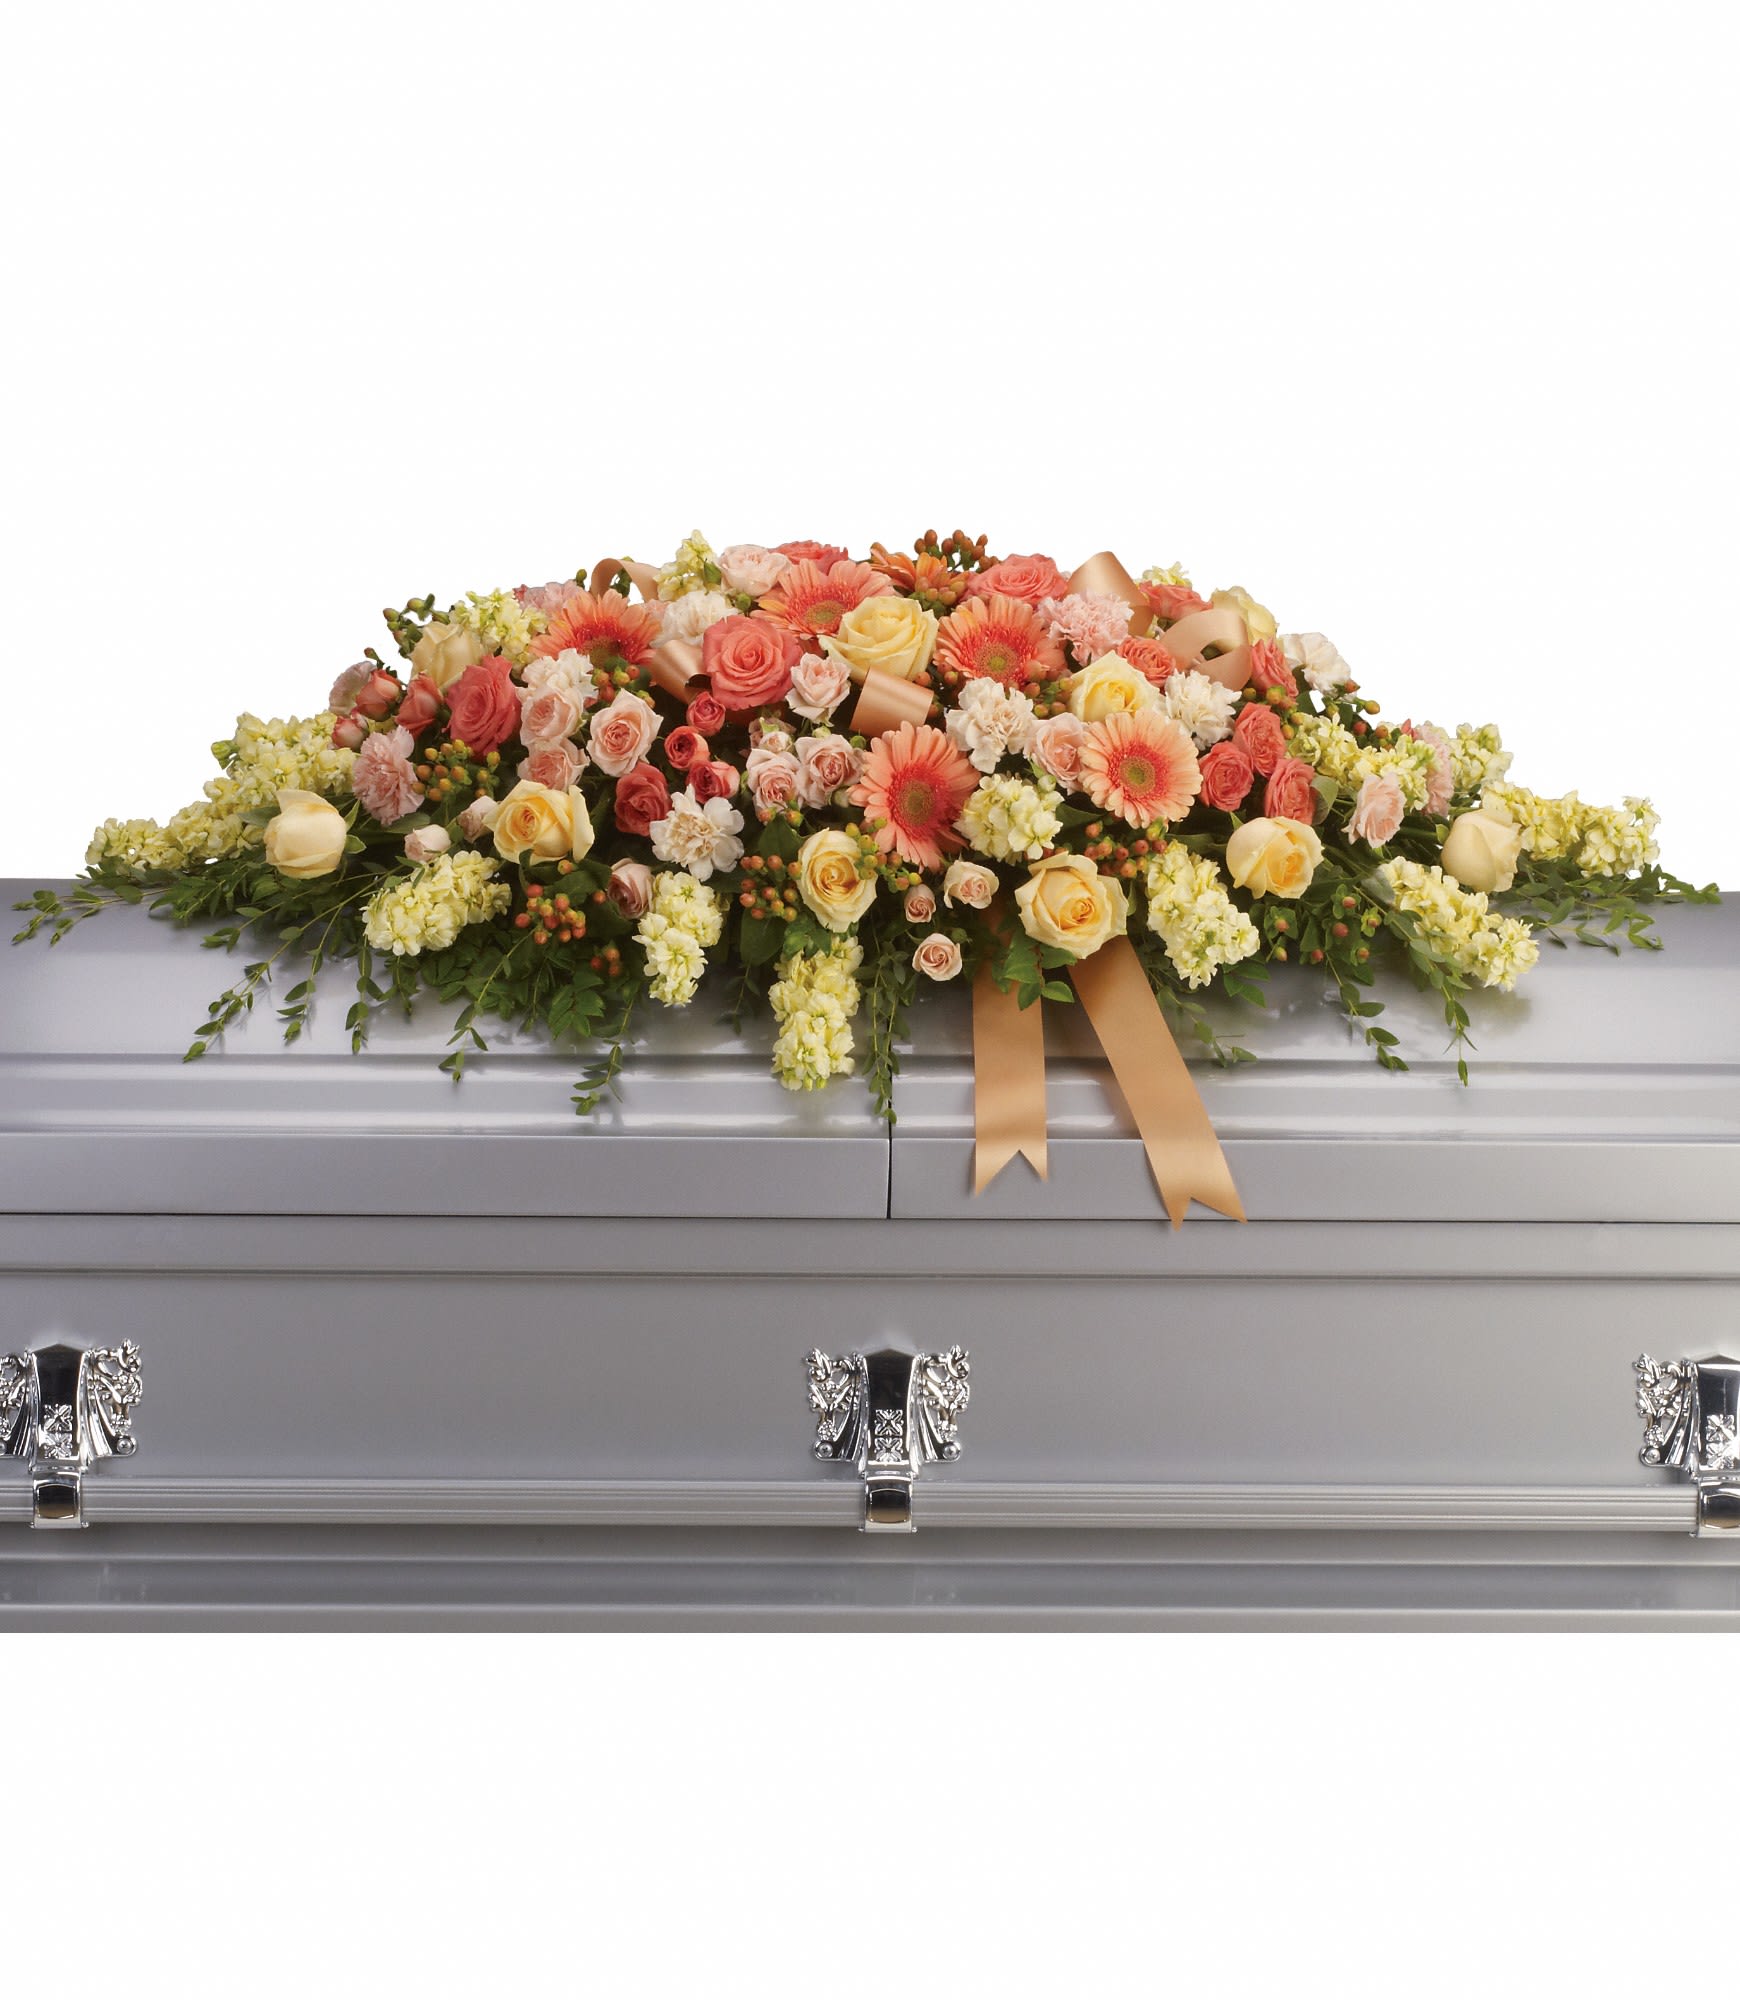 Warmest Remembrance Casket Spray by Teleflora - This tastefully colorful casket spray is not only a tribute to a lost loved one, but a reminder of the many joyous times spent together. 